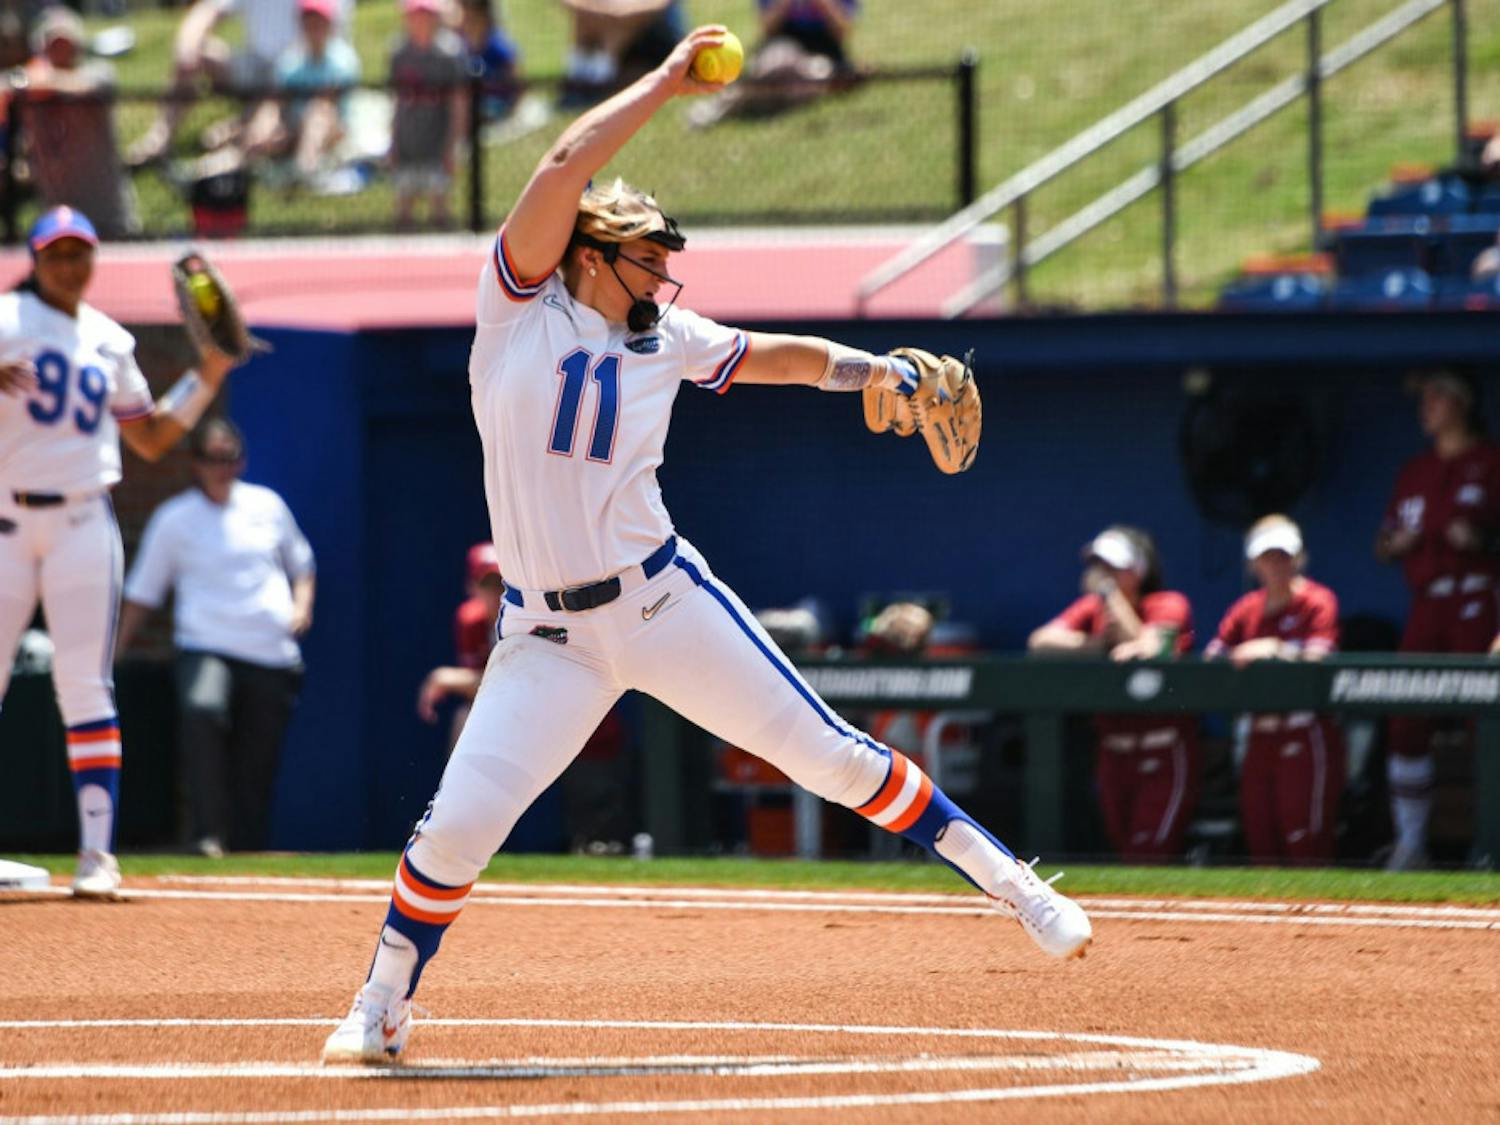 Kelly Barnhill threw a complete game in Sunday's 3-1 victory over Arkansas. She allowed two hits and struck out eight batters.
&nbsp;